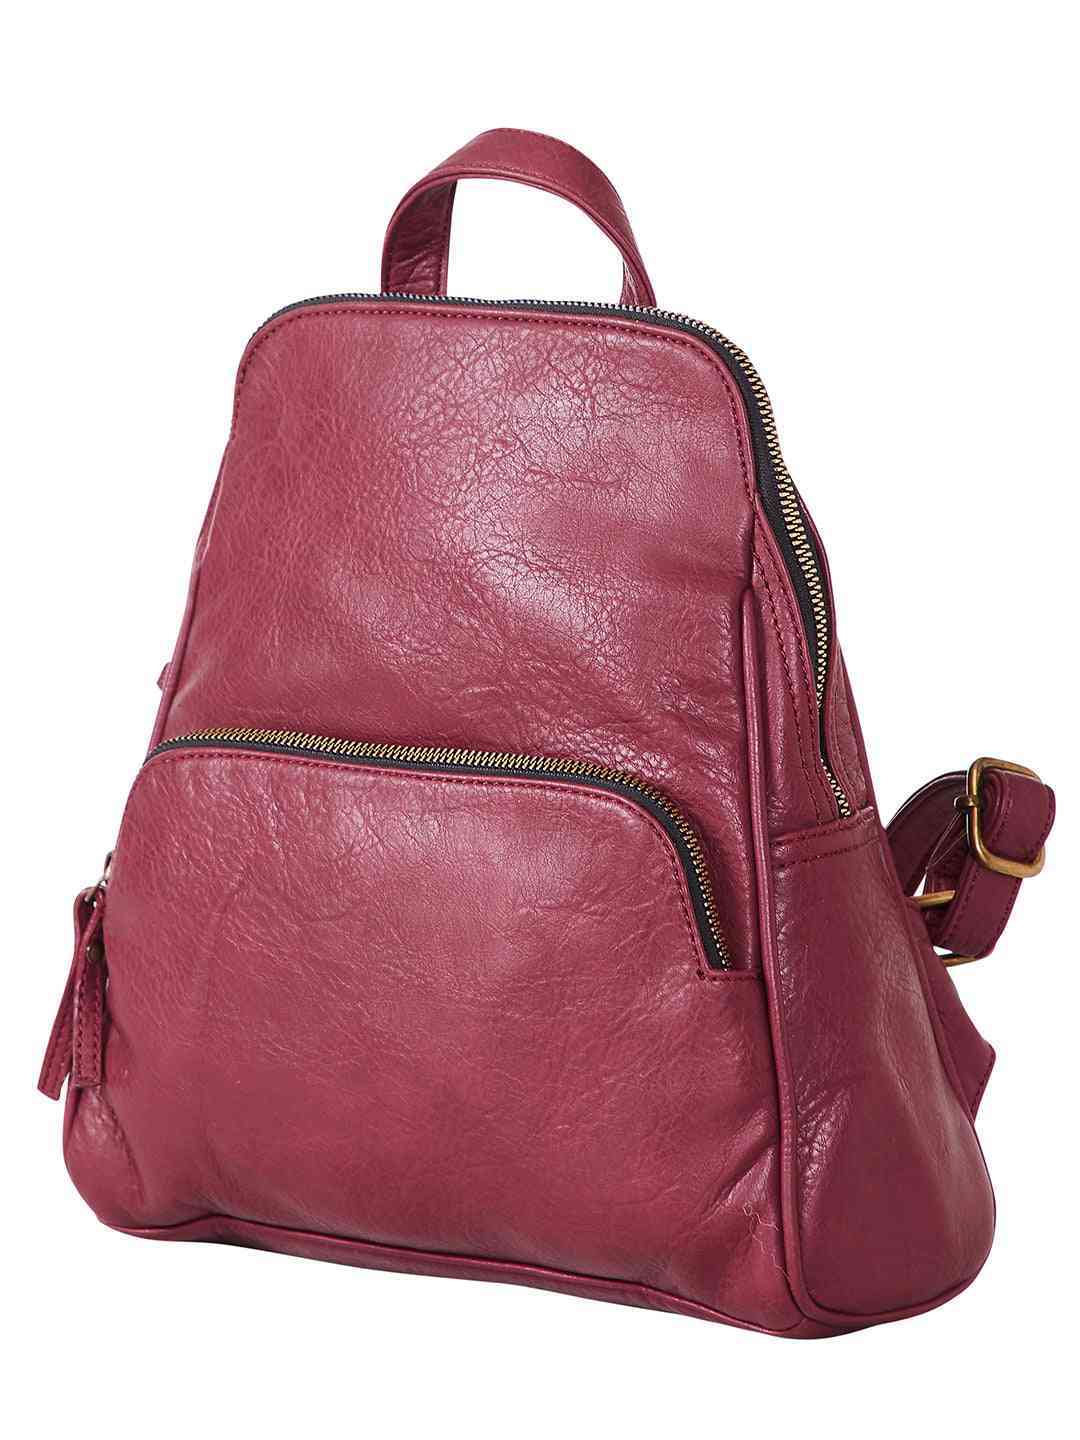 Mona-B Bag Mona B Convertible Backpack for Offices Schools and Colleges with Stylish Design for Women: Grace (MLT)- (SH-110 MLT	)